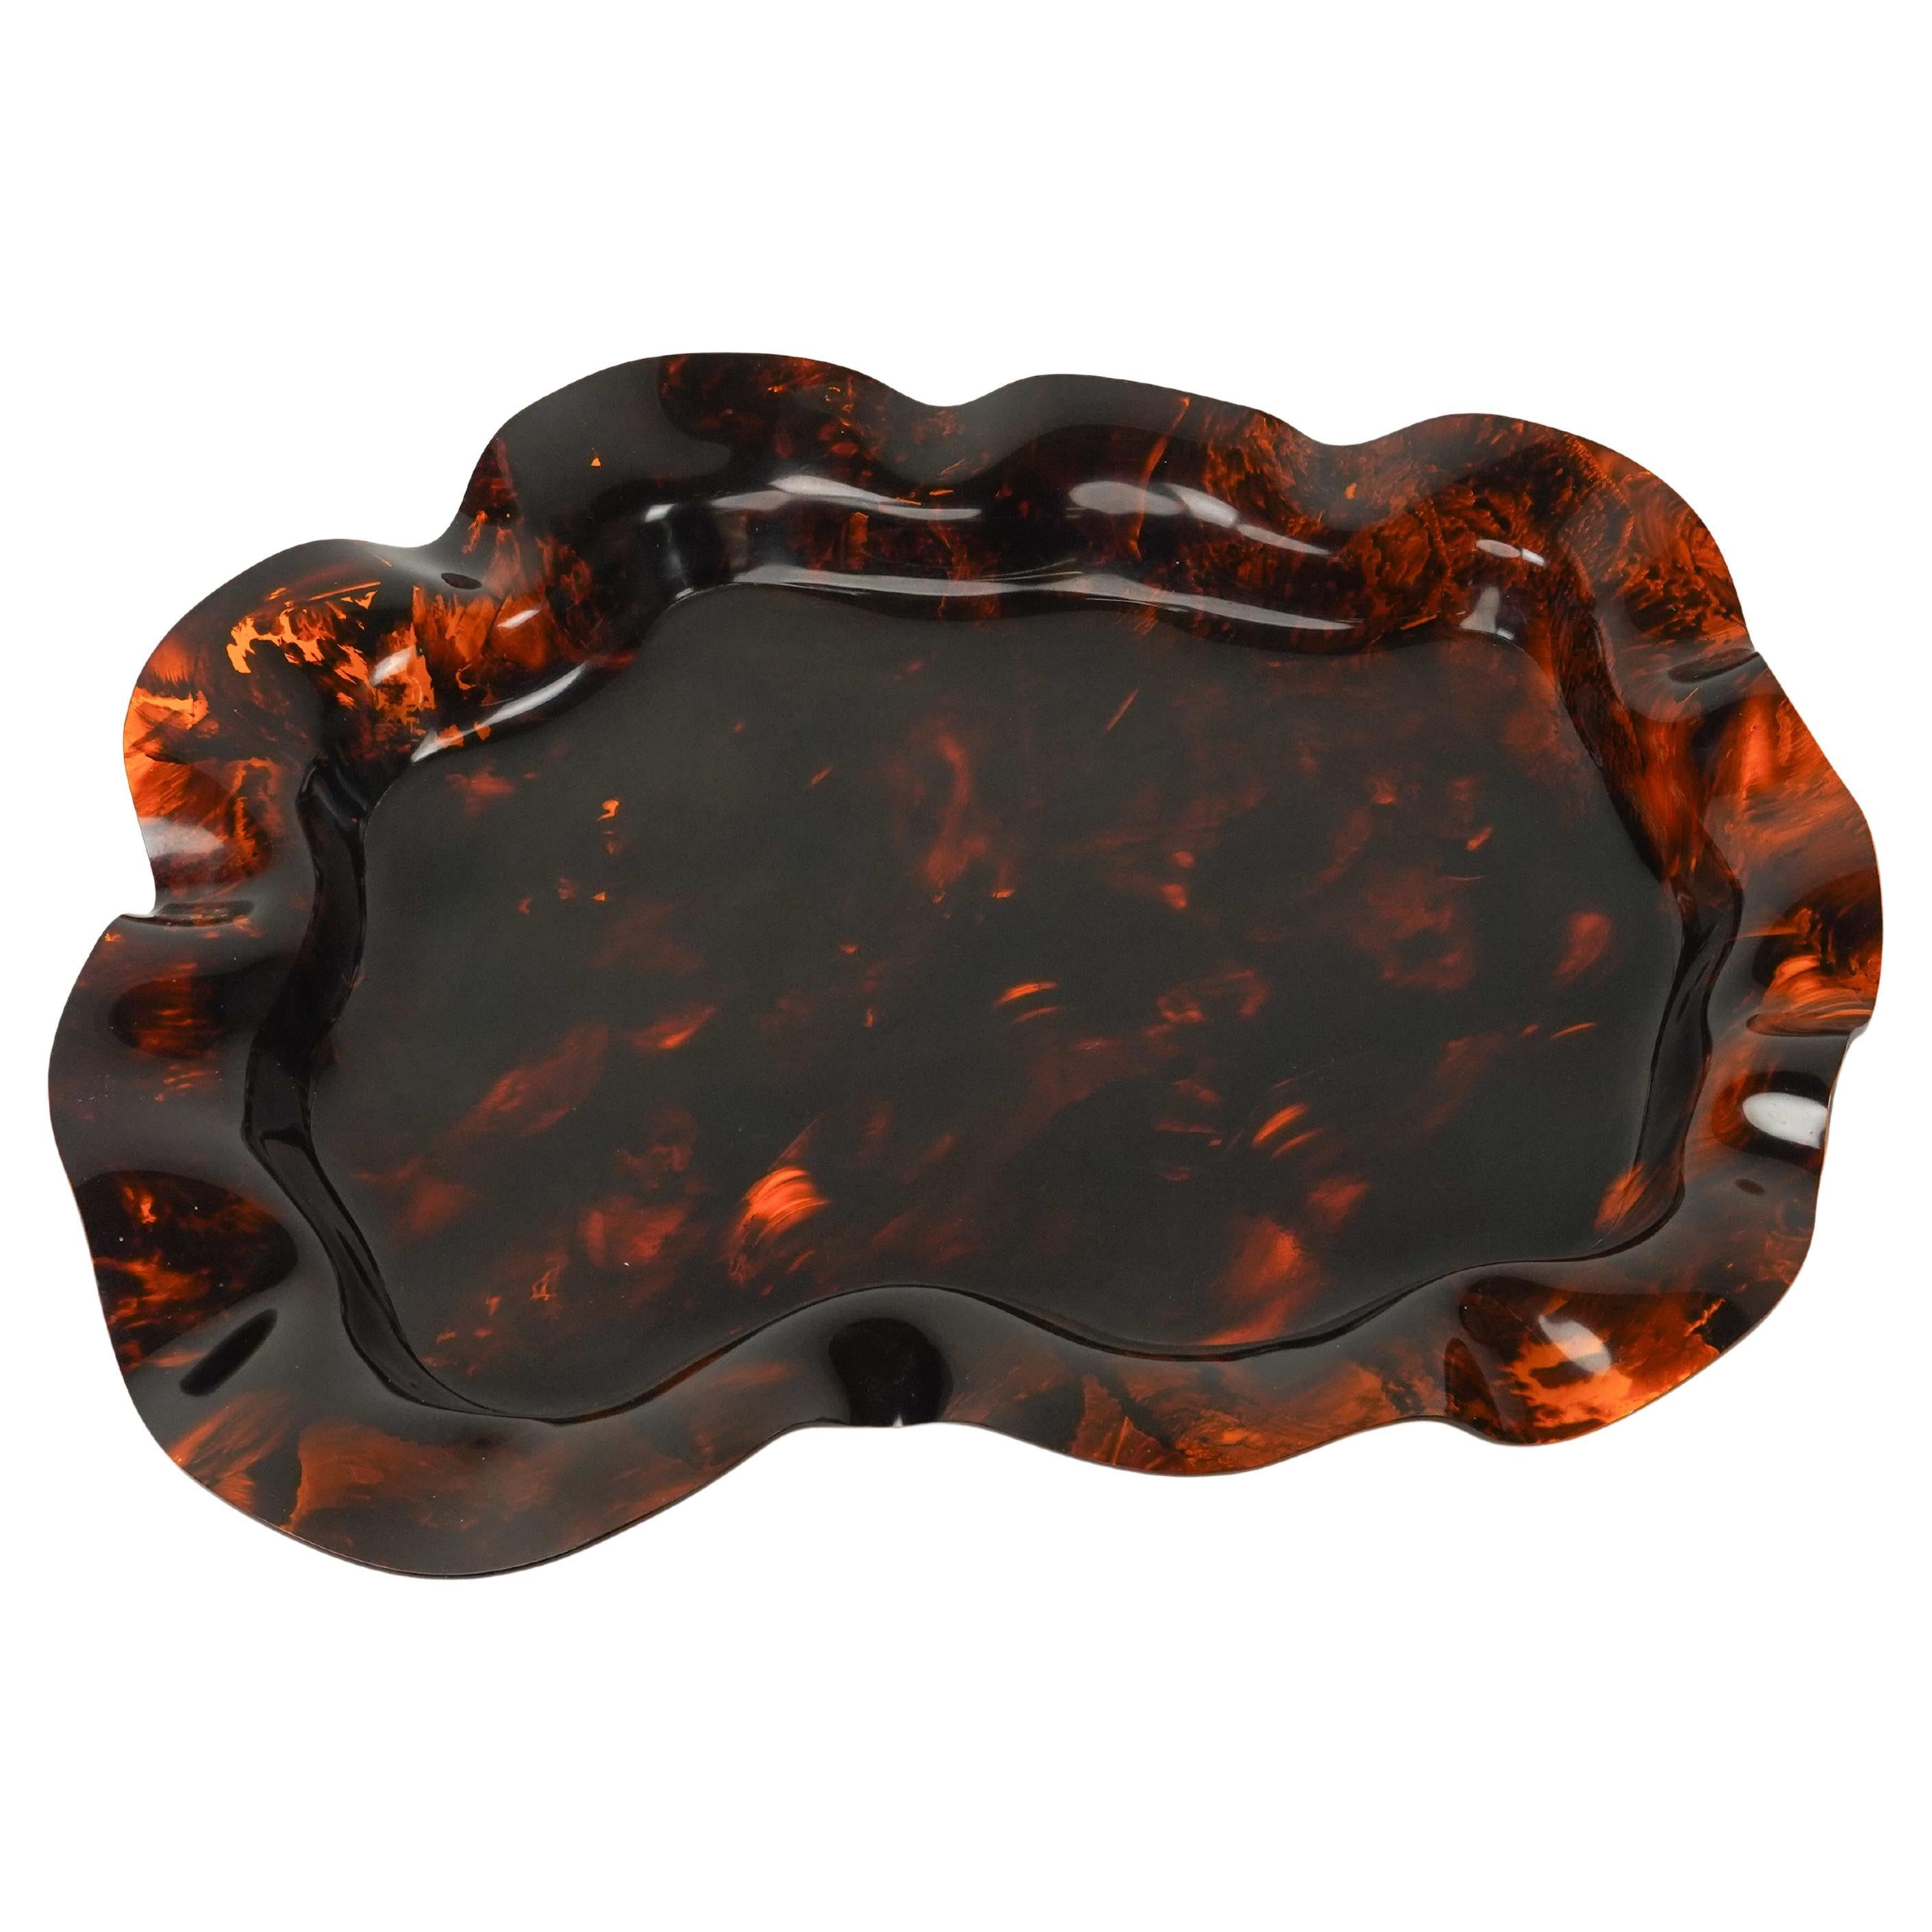 Large Serving Tray or Centerpiece Lucite Faux Tortoiseshell, Italy 1970s For Sale